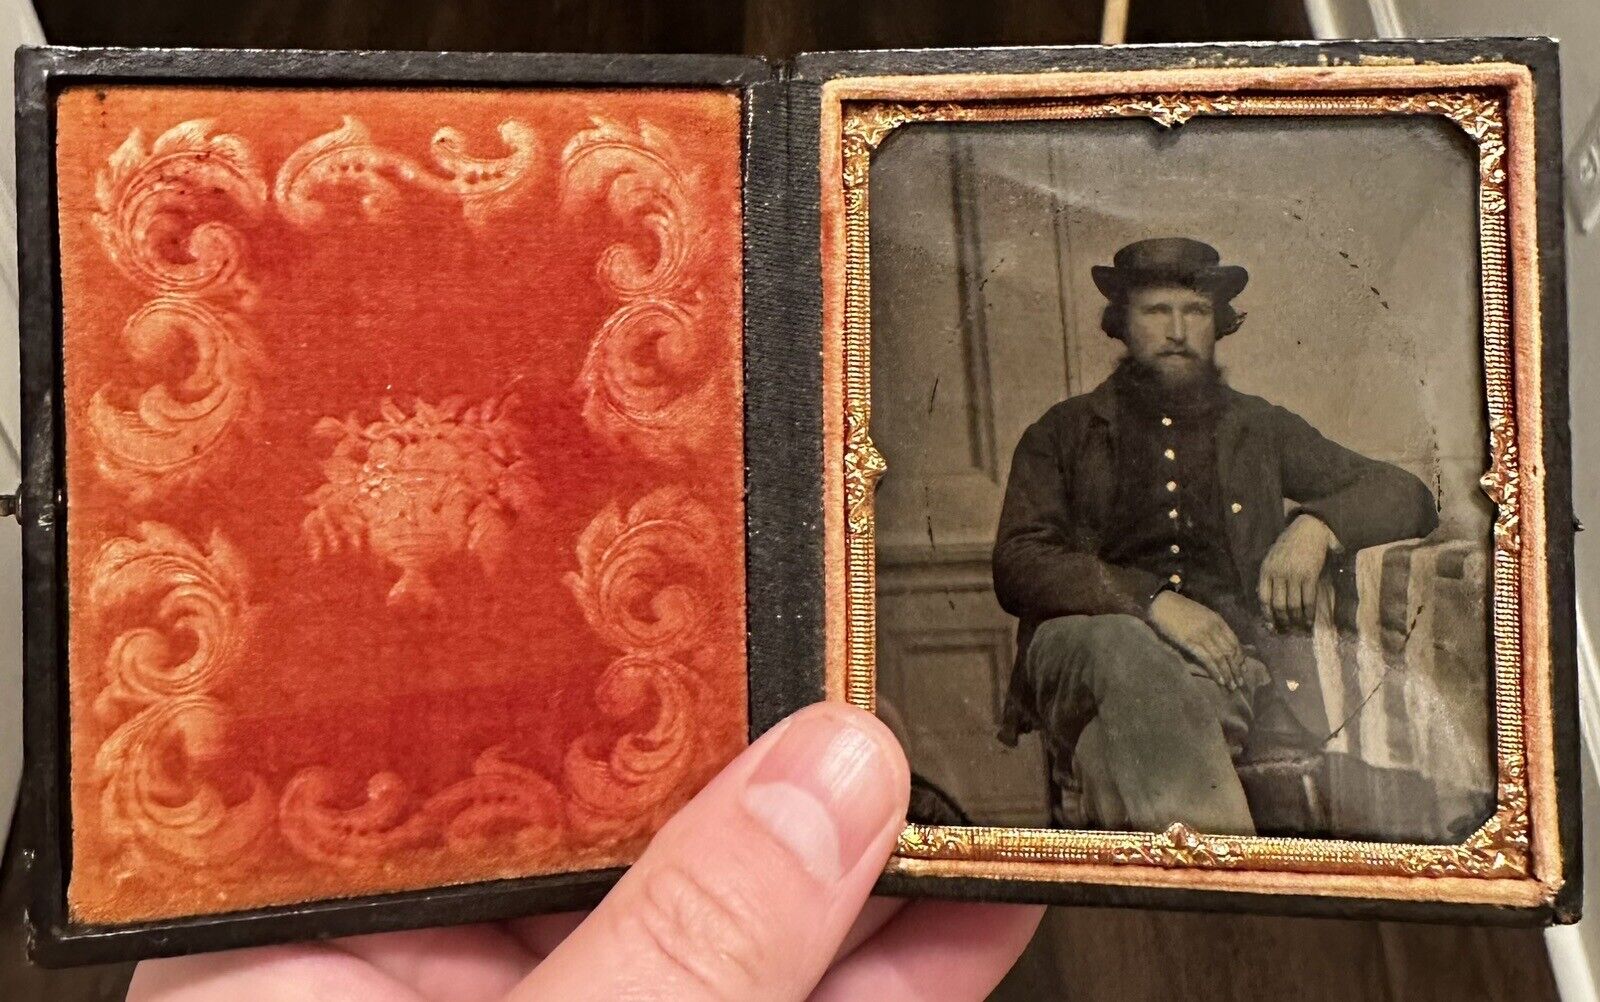 Civil War 1/6th Plate Image Of Soldier Posed Next To Flag